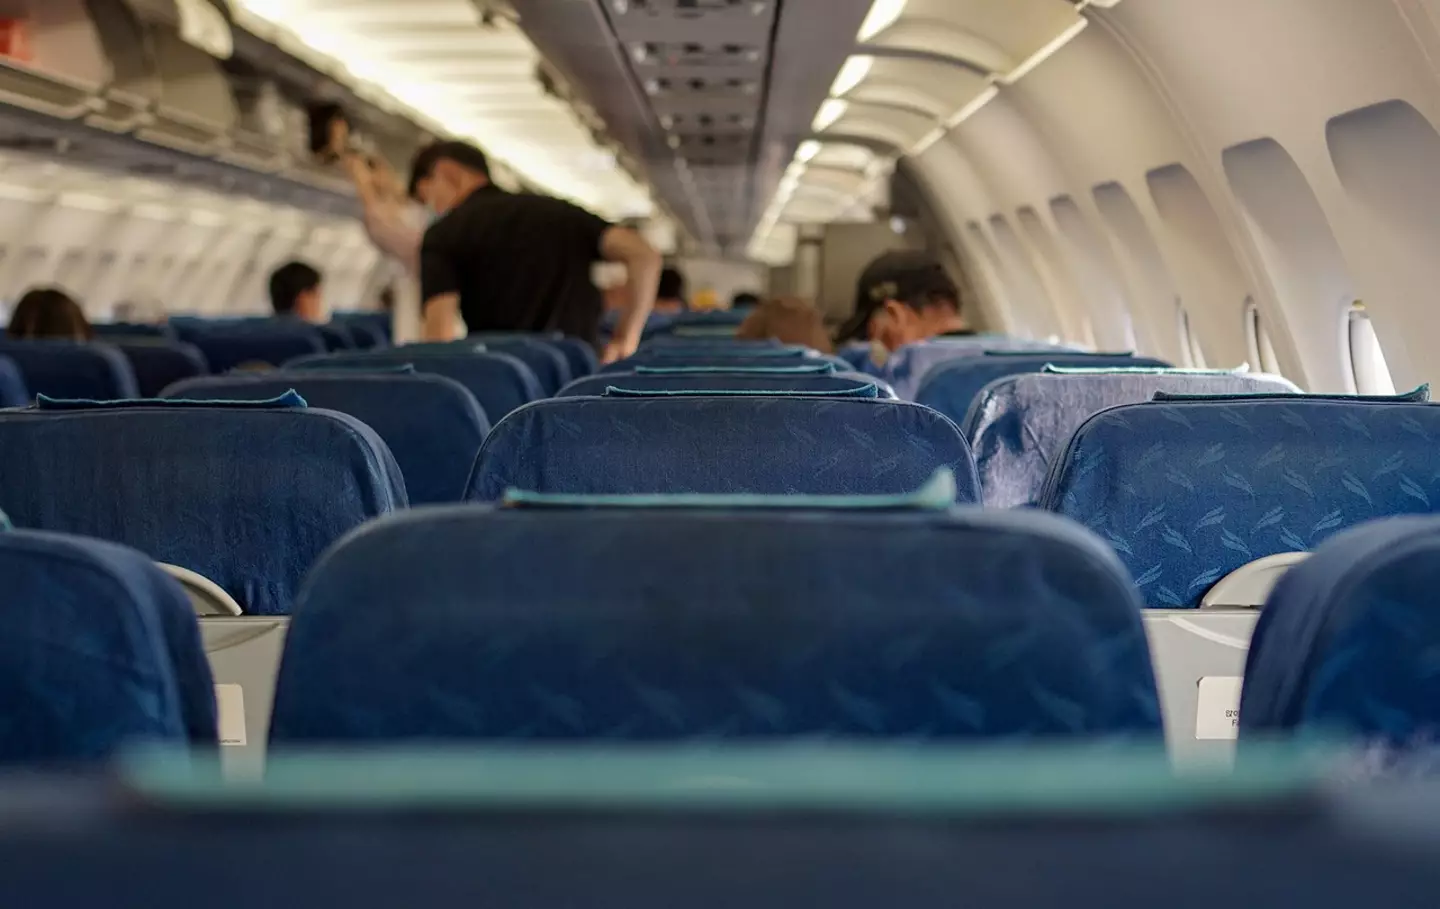 Experts and flight attendants have urged against the so-called 'hack'.